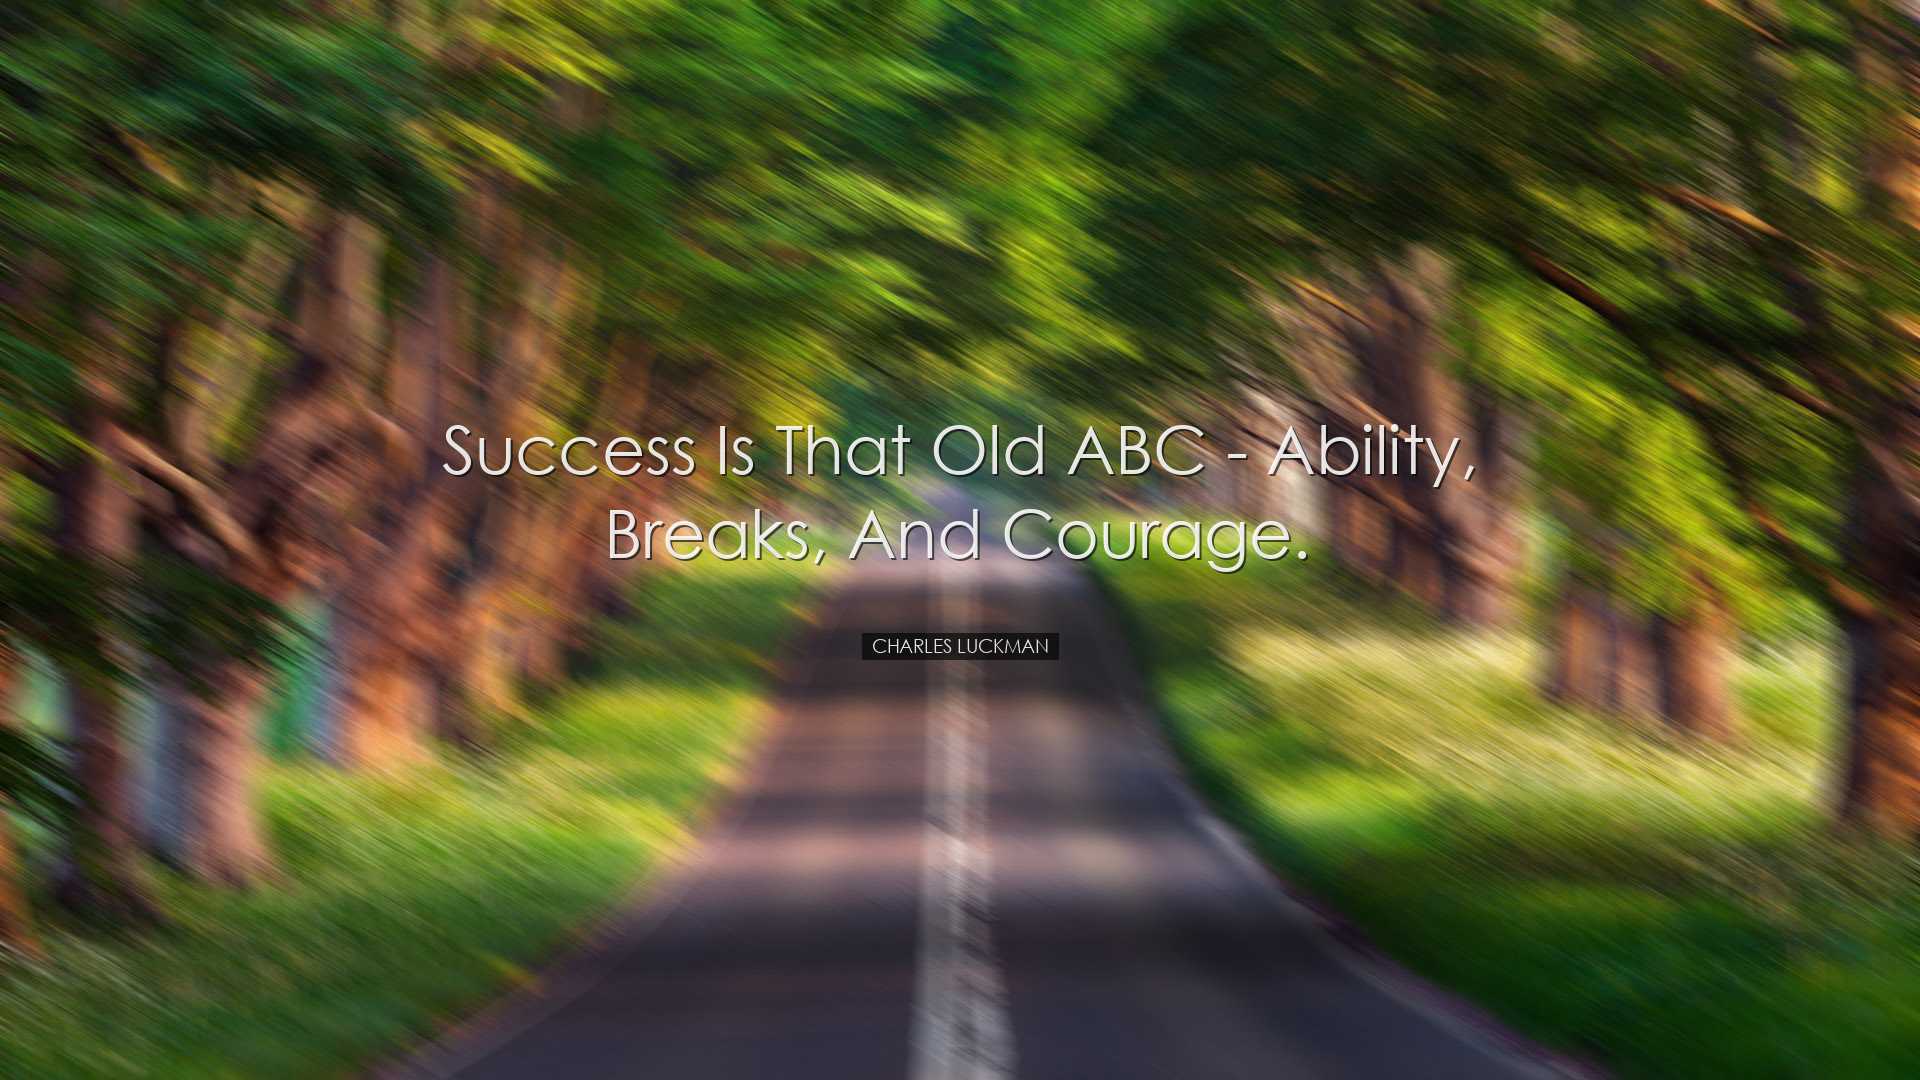 Success is that old ABC - ability, breaks, and courage. - Charles